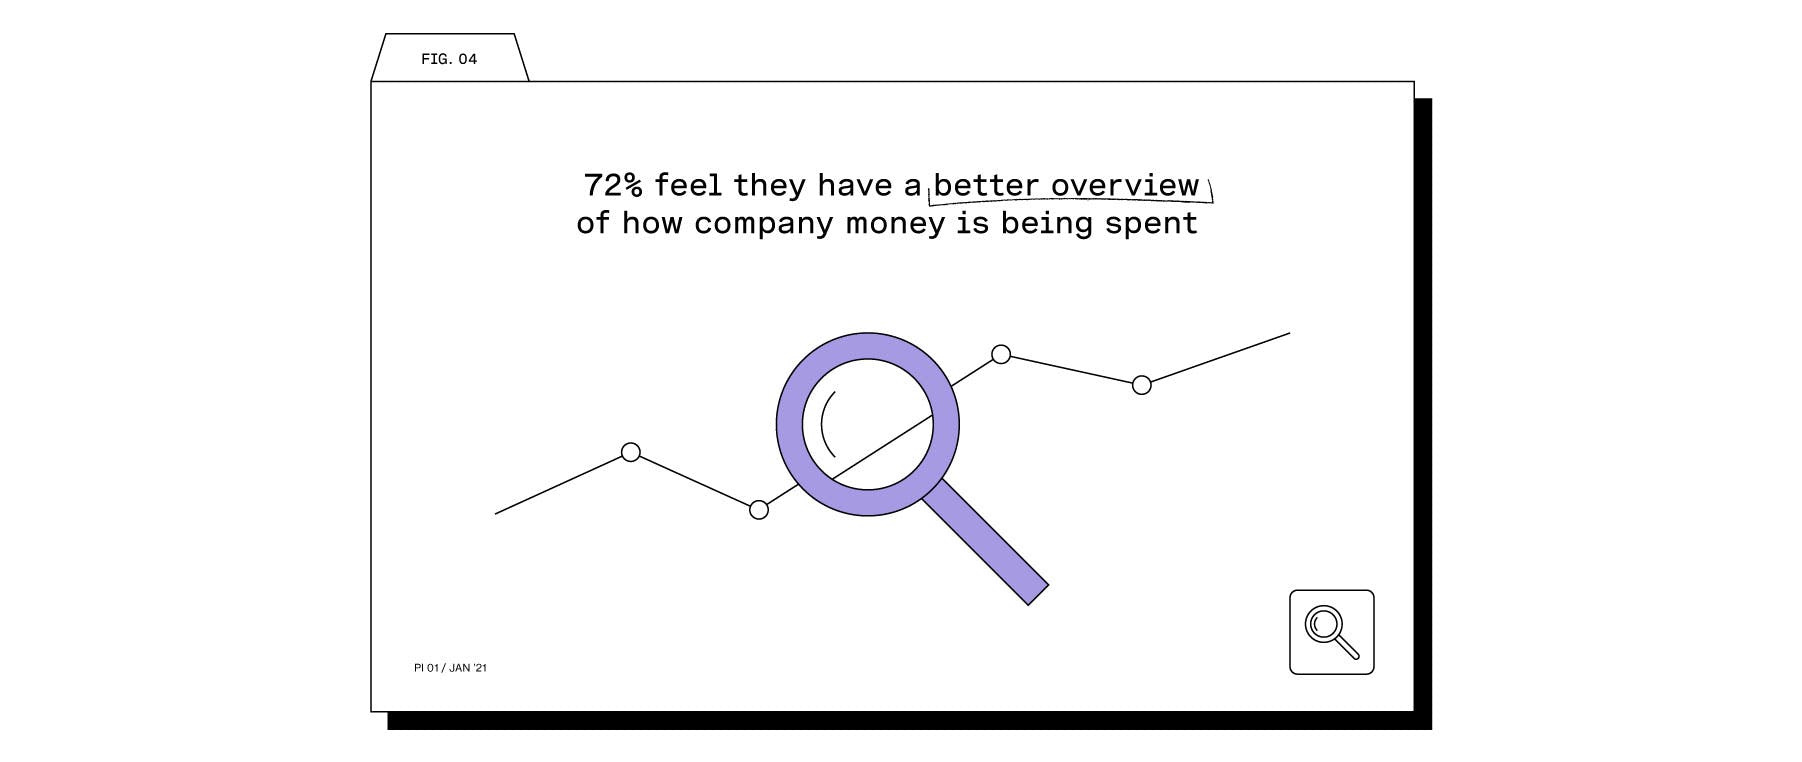 72% have an better overview using Pleo